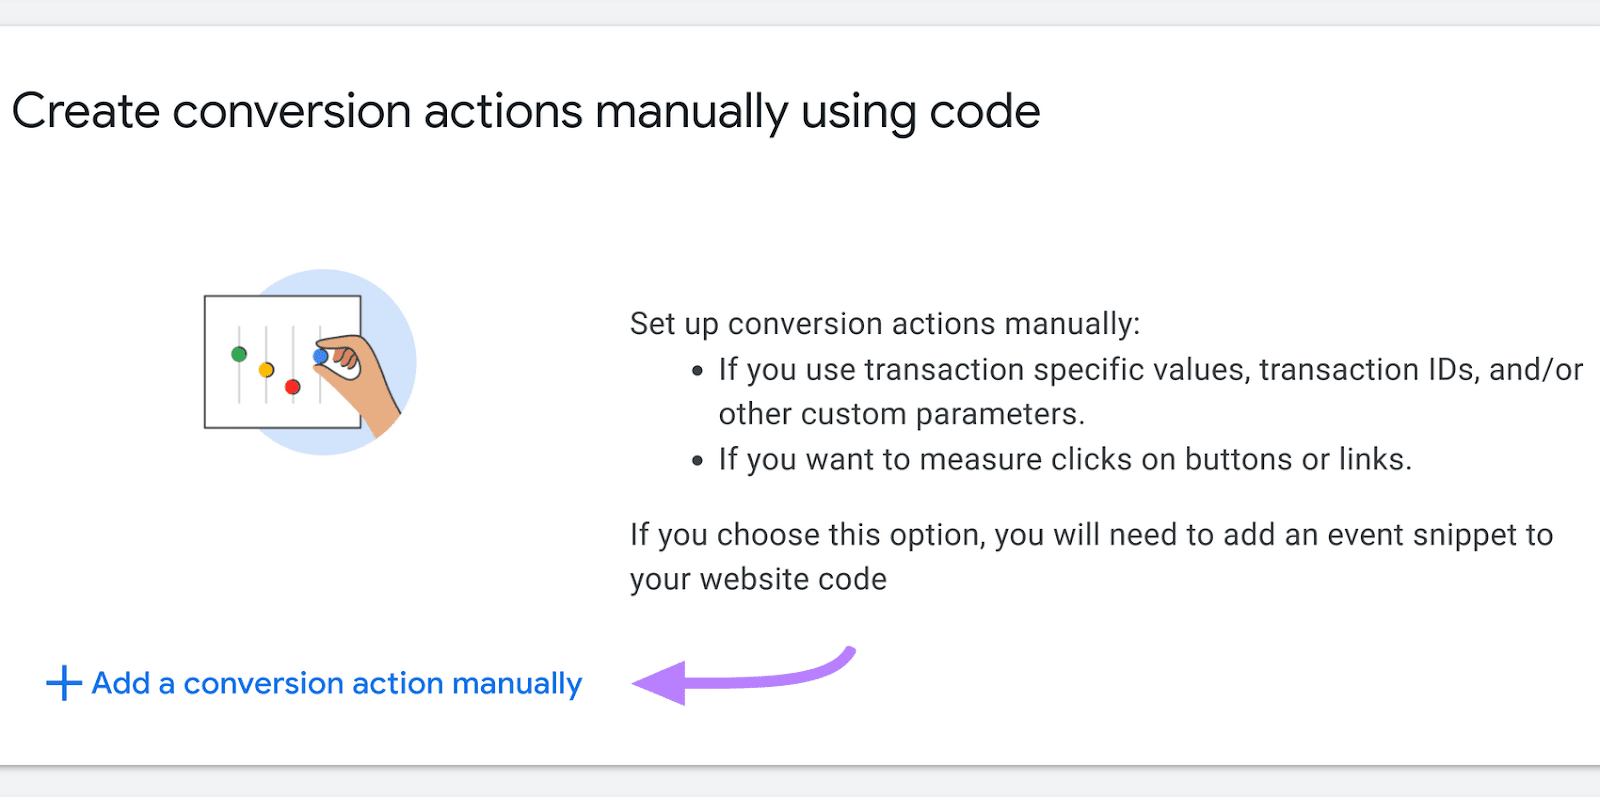 “Add a conversion action manually" button highlighted